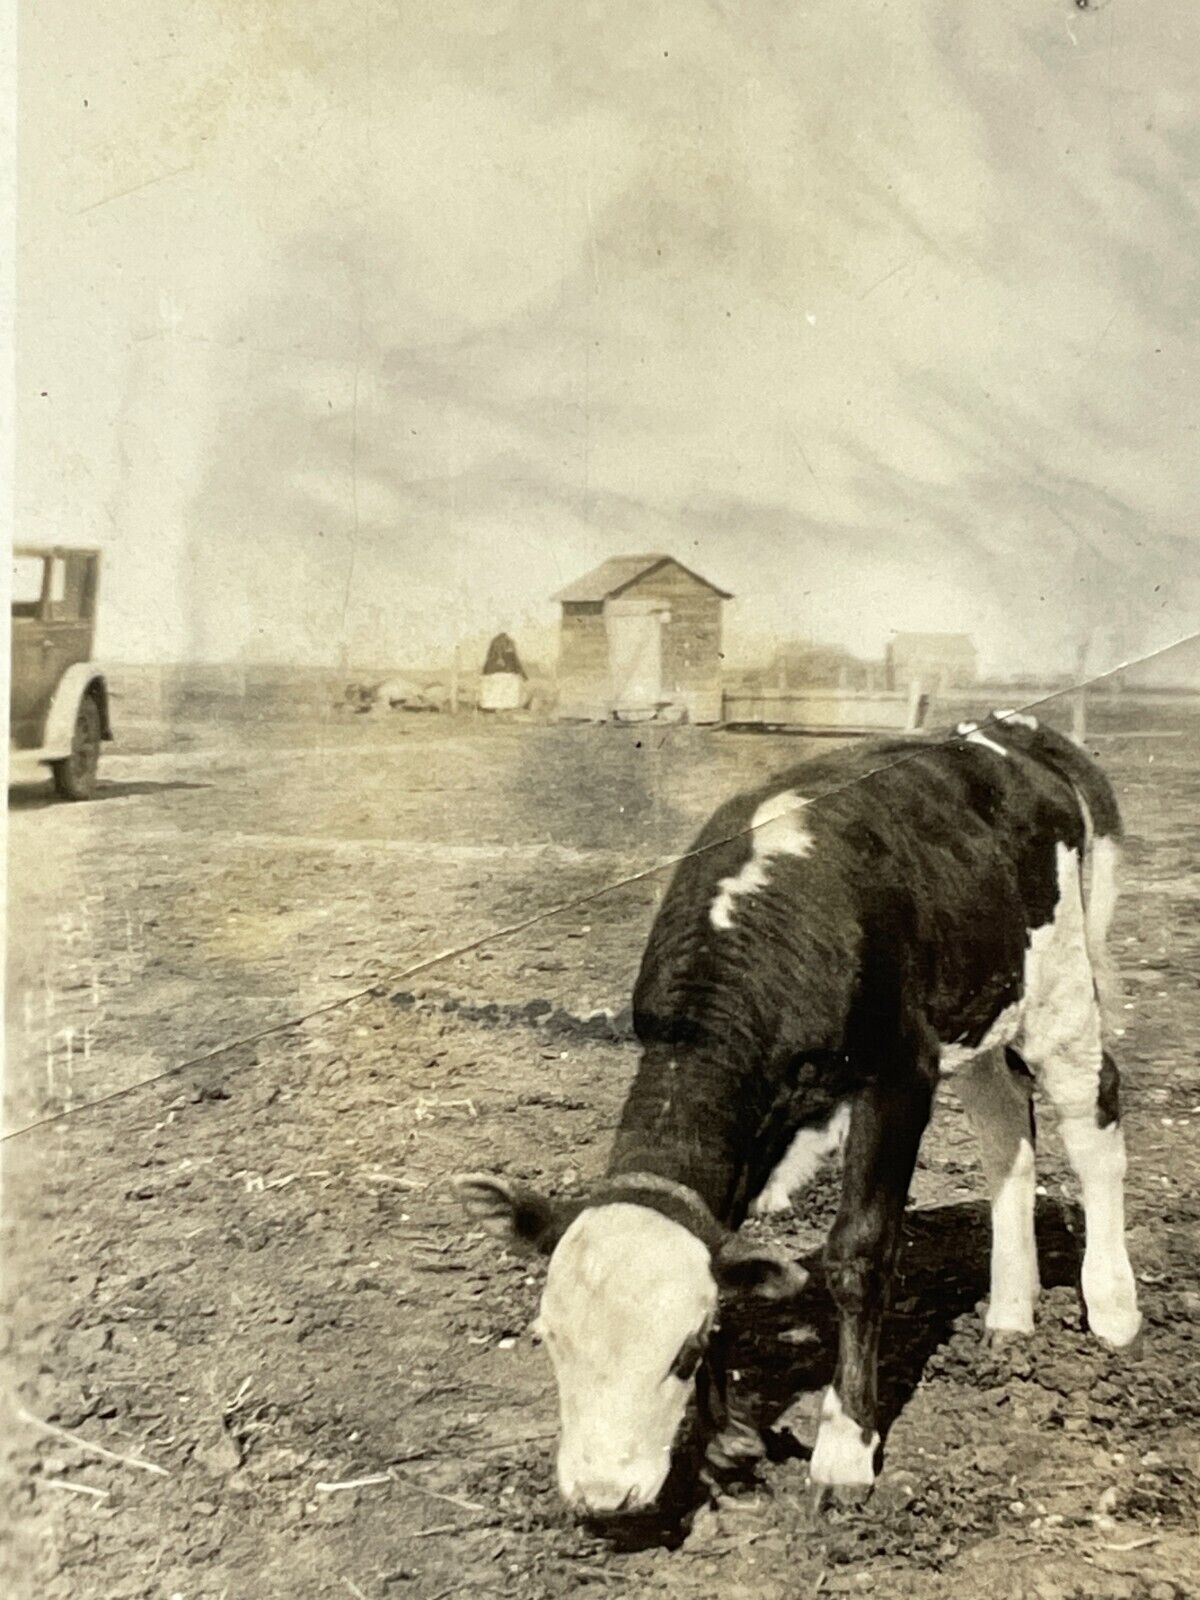 W9 Photograph Artistic View Cow In Country On Farm Shadow Photographer *Creased*